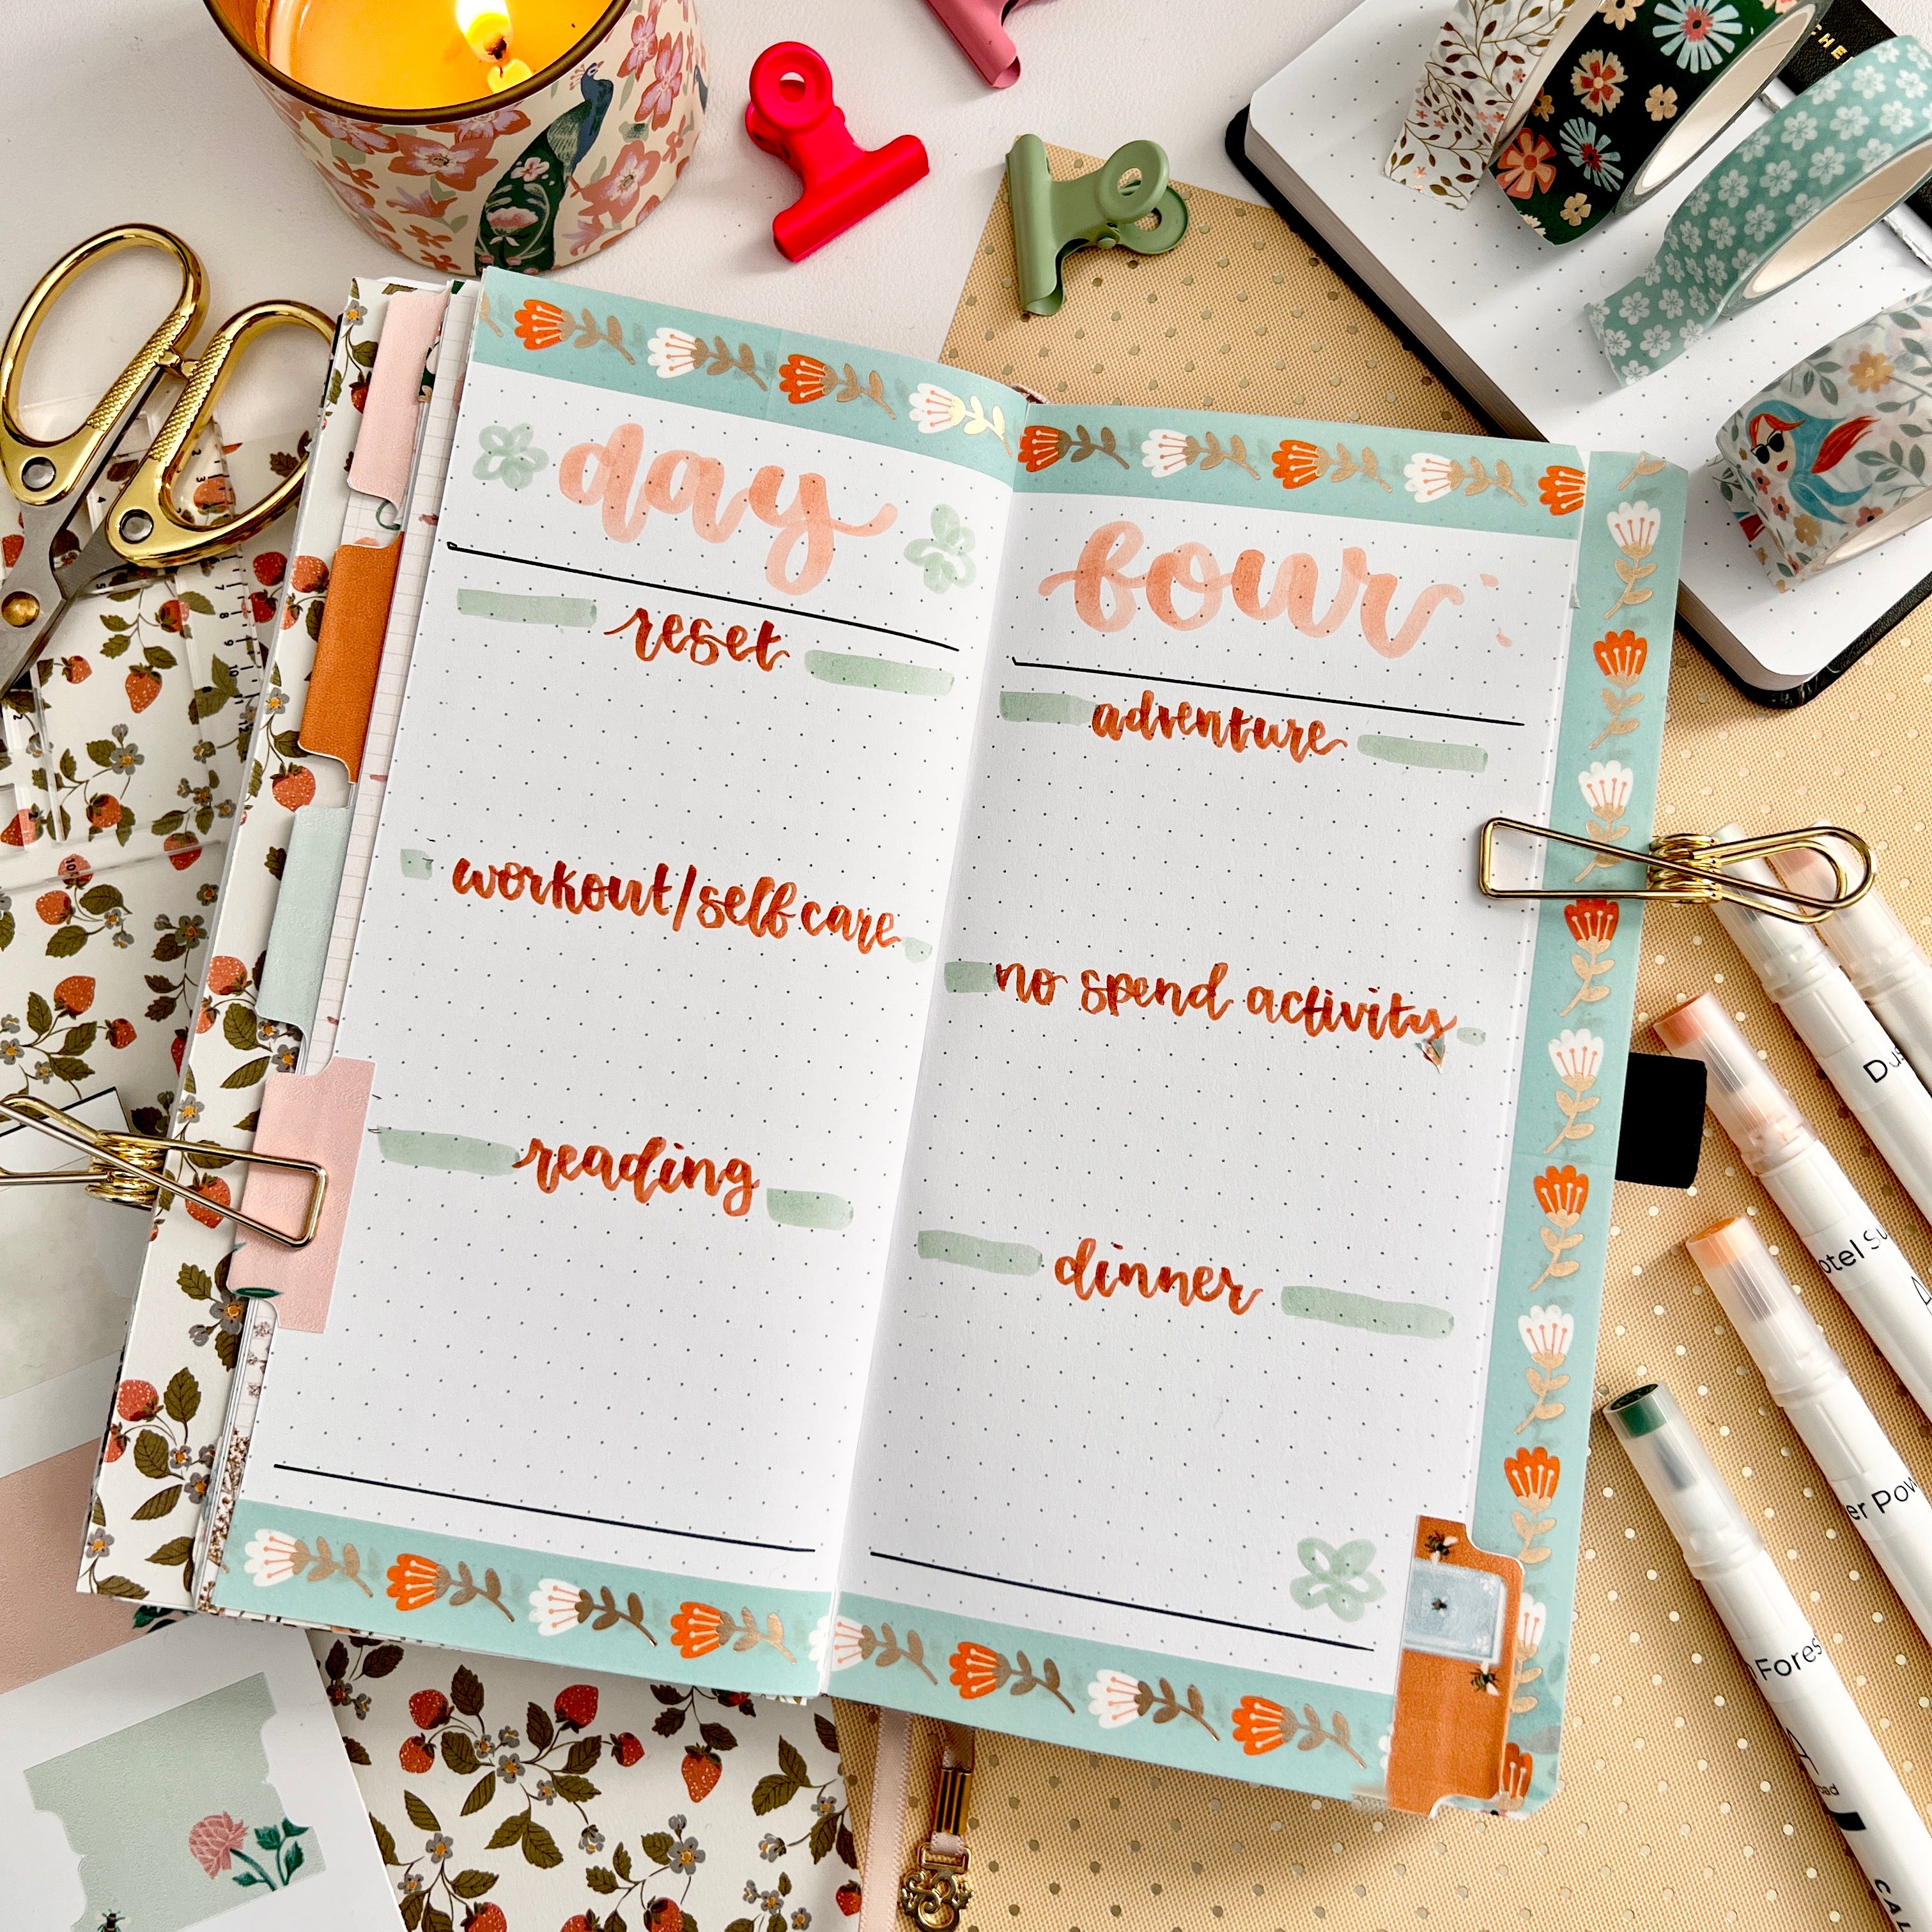 Traveler's size notebook in a flat lay photo, surrounded by stationery, open to a full page spread that says "Day Four" heading a layout with six staycation category ideas.